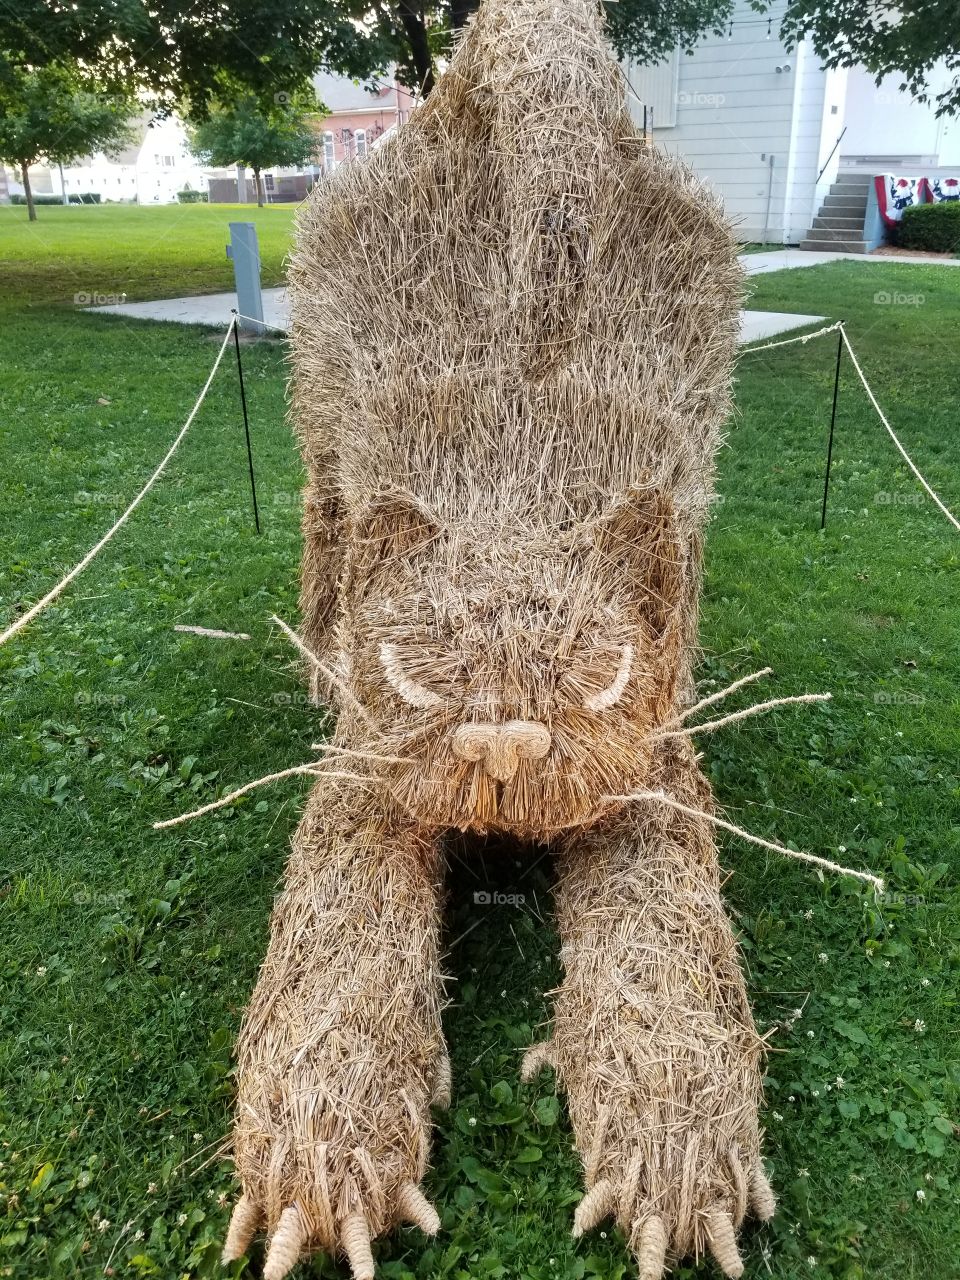 Straw cat with tail, claws, eyes nose whiskers